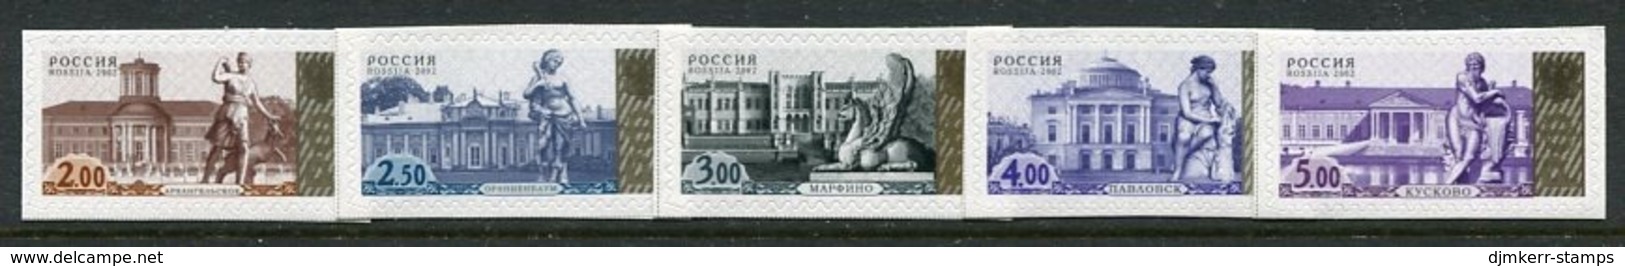 RUSSIA 2002 Definitive: Palaces And Statues MNH / **.  Michel 1045-49 - Ungebraucht